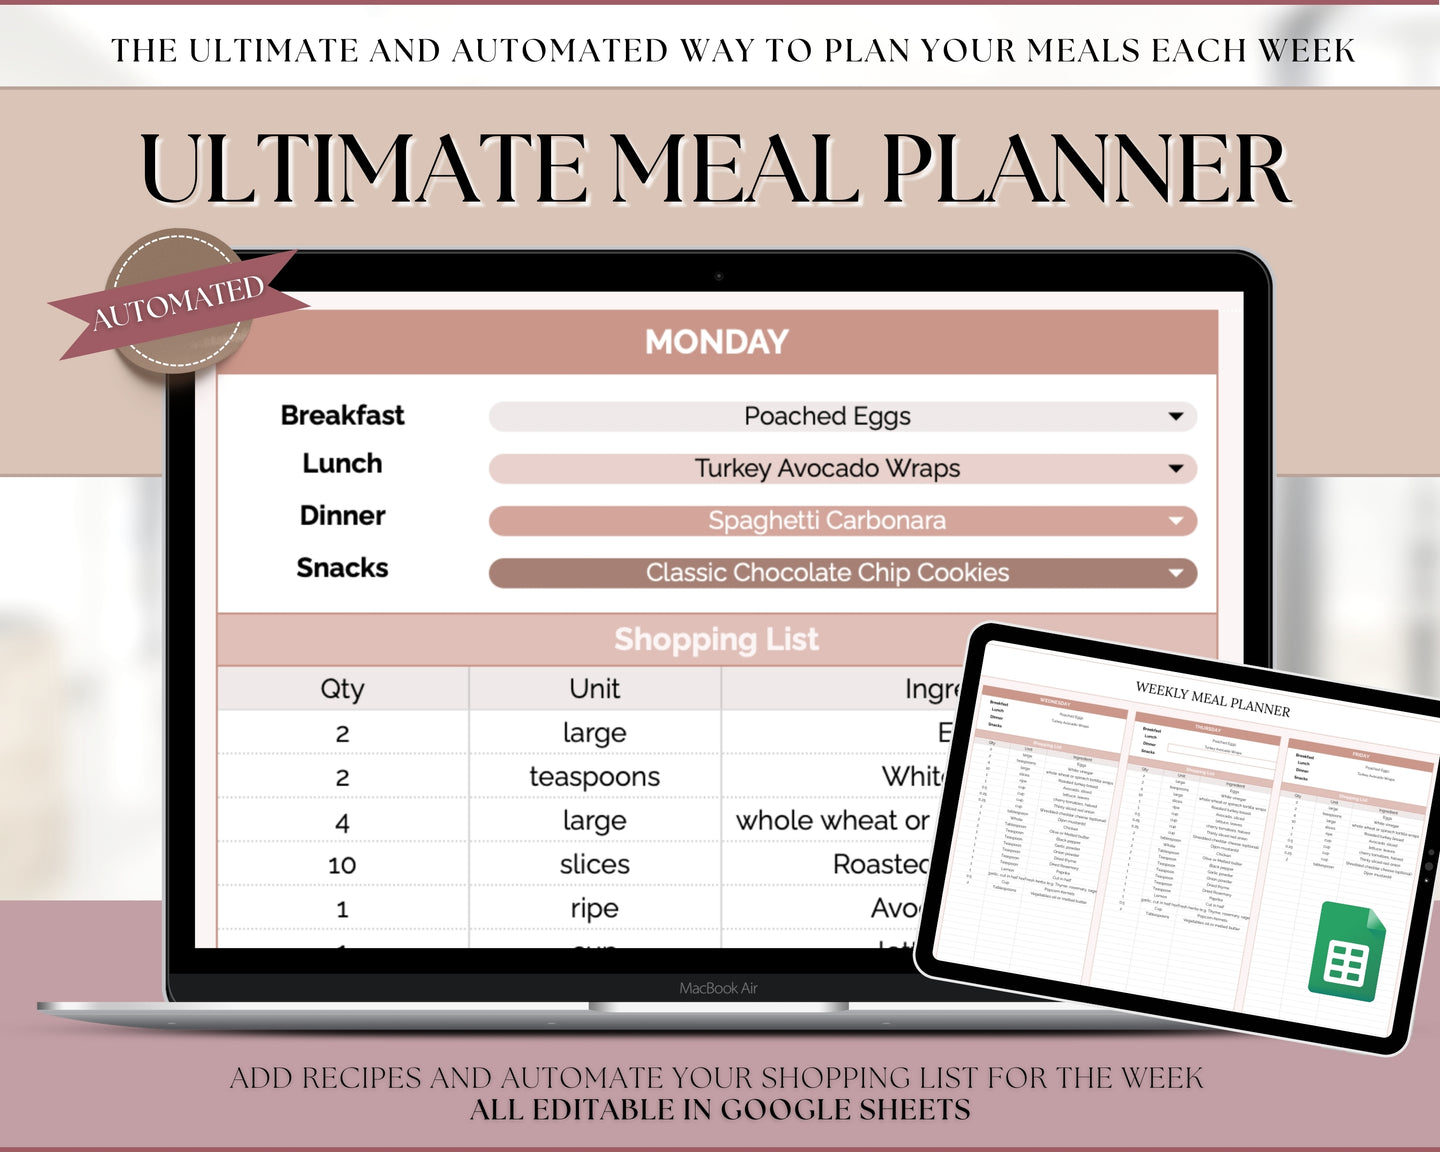 Ultimate Meal Planner Spreadsheet | Perfect Recipe Template with AUTOMATED Grocery List, Family Meal Prep, Weekly Meal Plan & Shopping List | Google Sheets | Lux